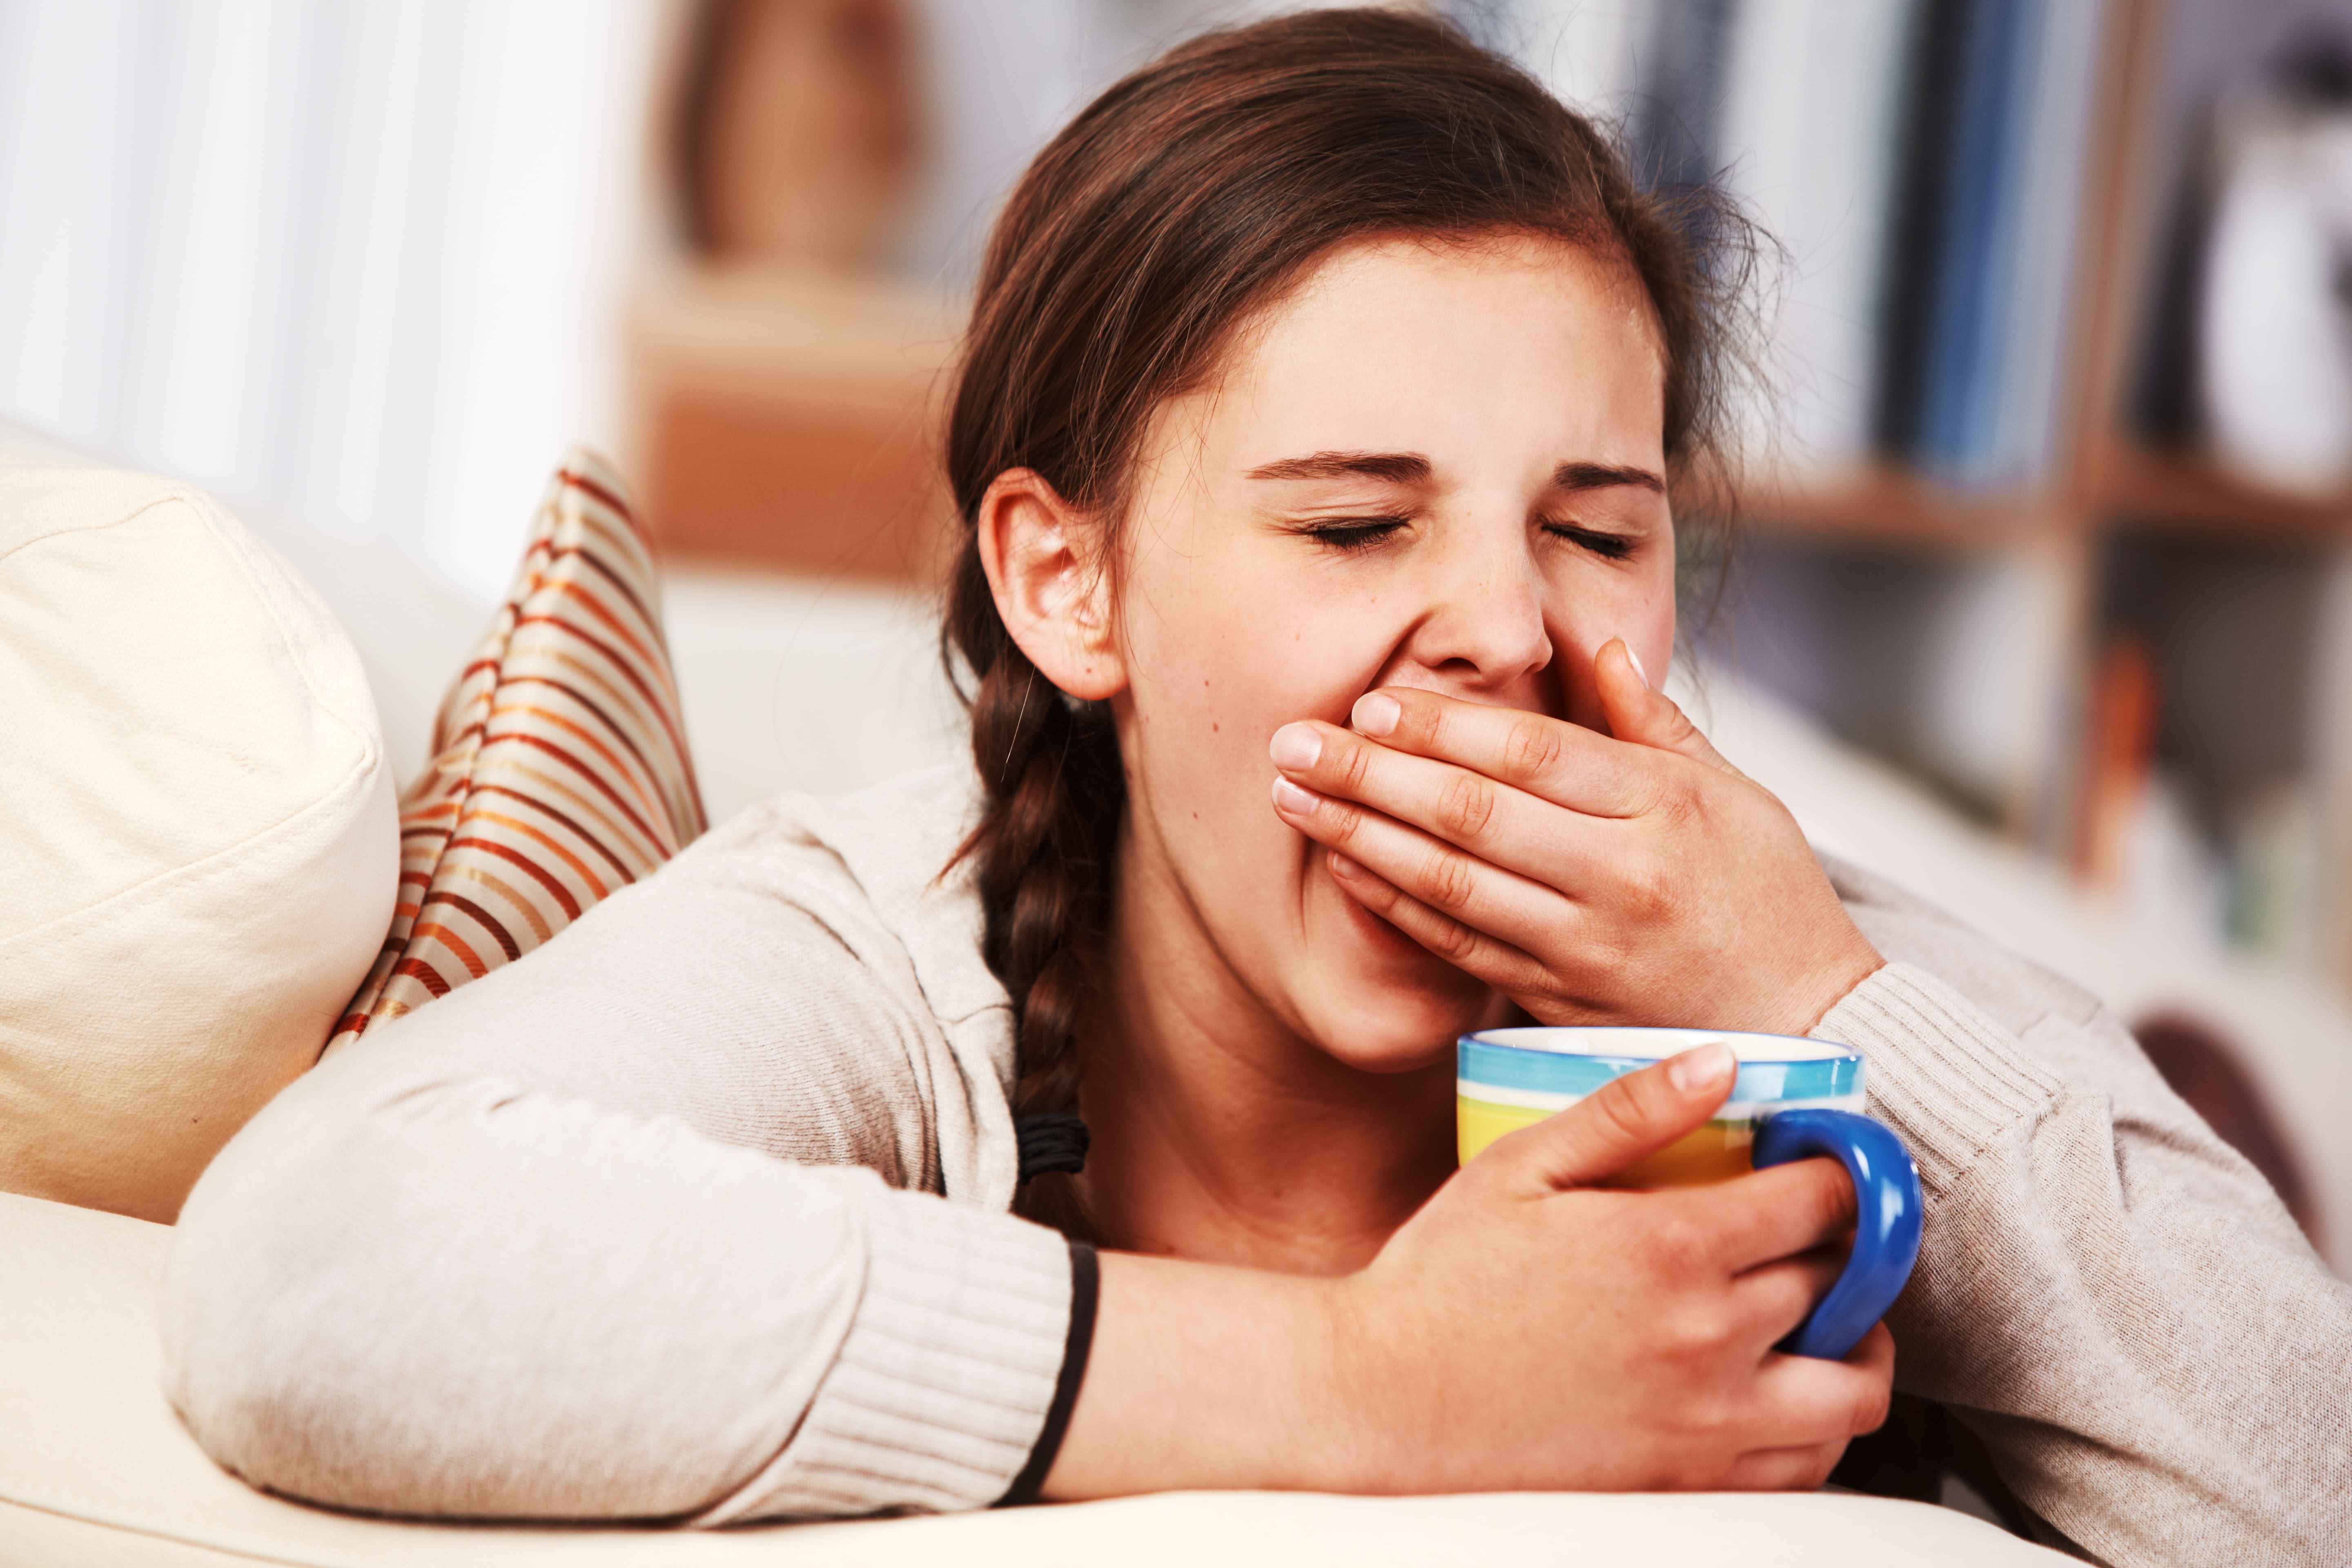 Teenage girl holding a cup in one hand and holding the other hand over her mouth as she yawns.